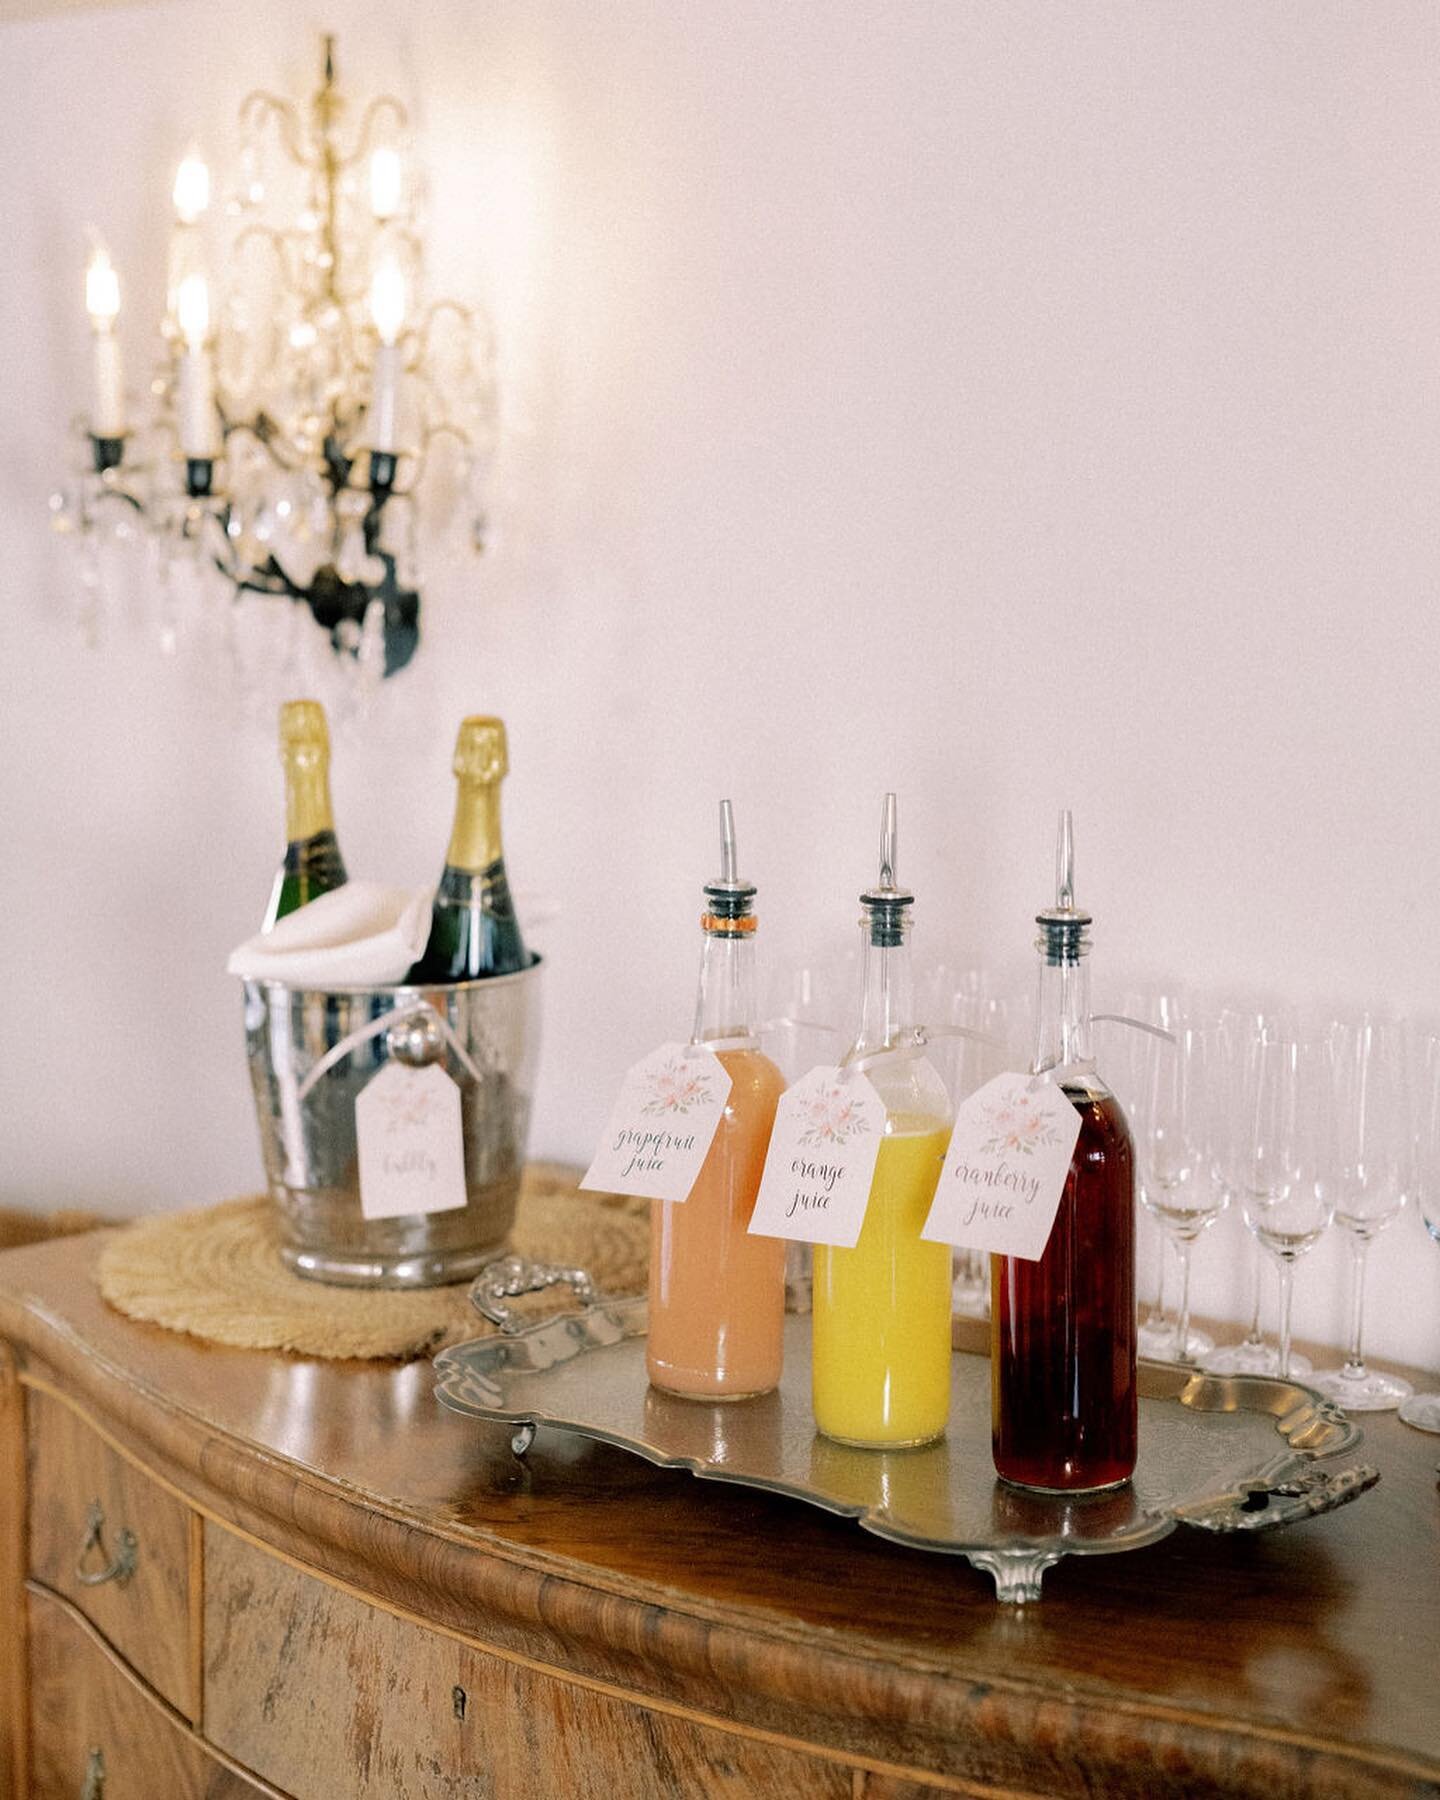 JUICE FIRST!

Did you know that pretty much every single mimosa bar sign available on Etsy is worded incorrectly? I noticed this when I was looking for a template for this styled bridal shower shoot at the Farm at Park Winters.

All the signs have yo